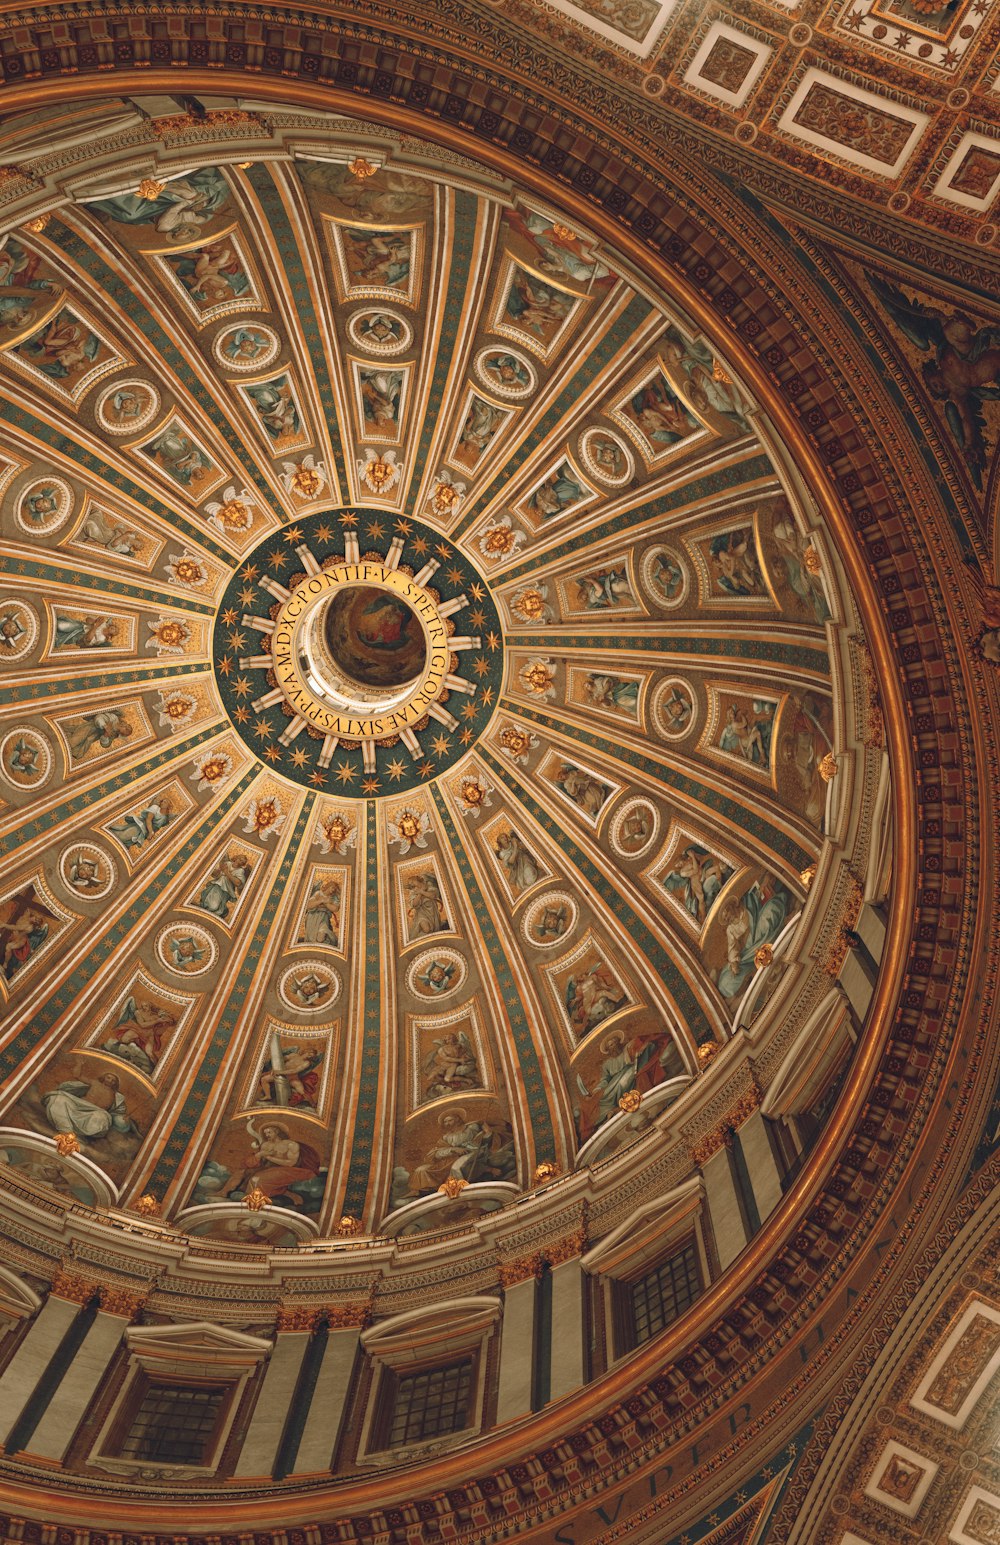 a domed ceiling in a building with intricate designs